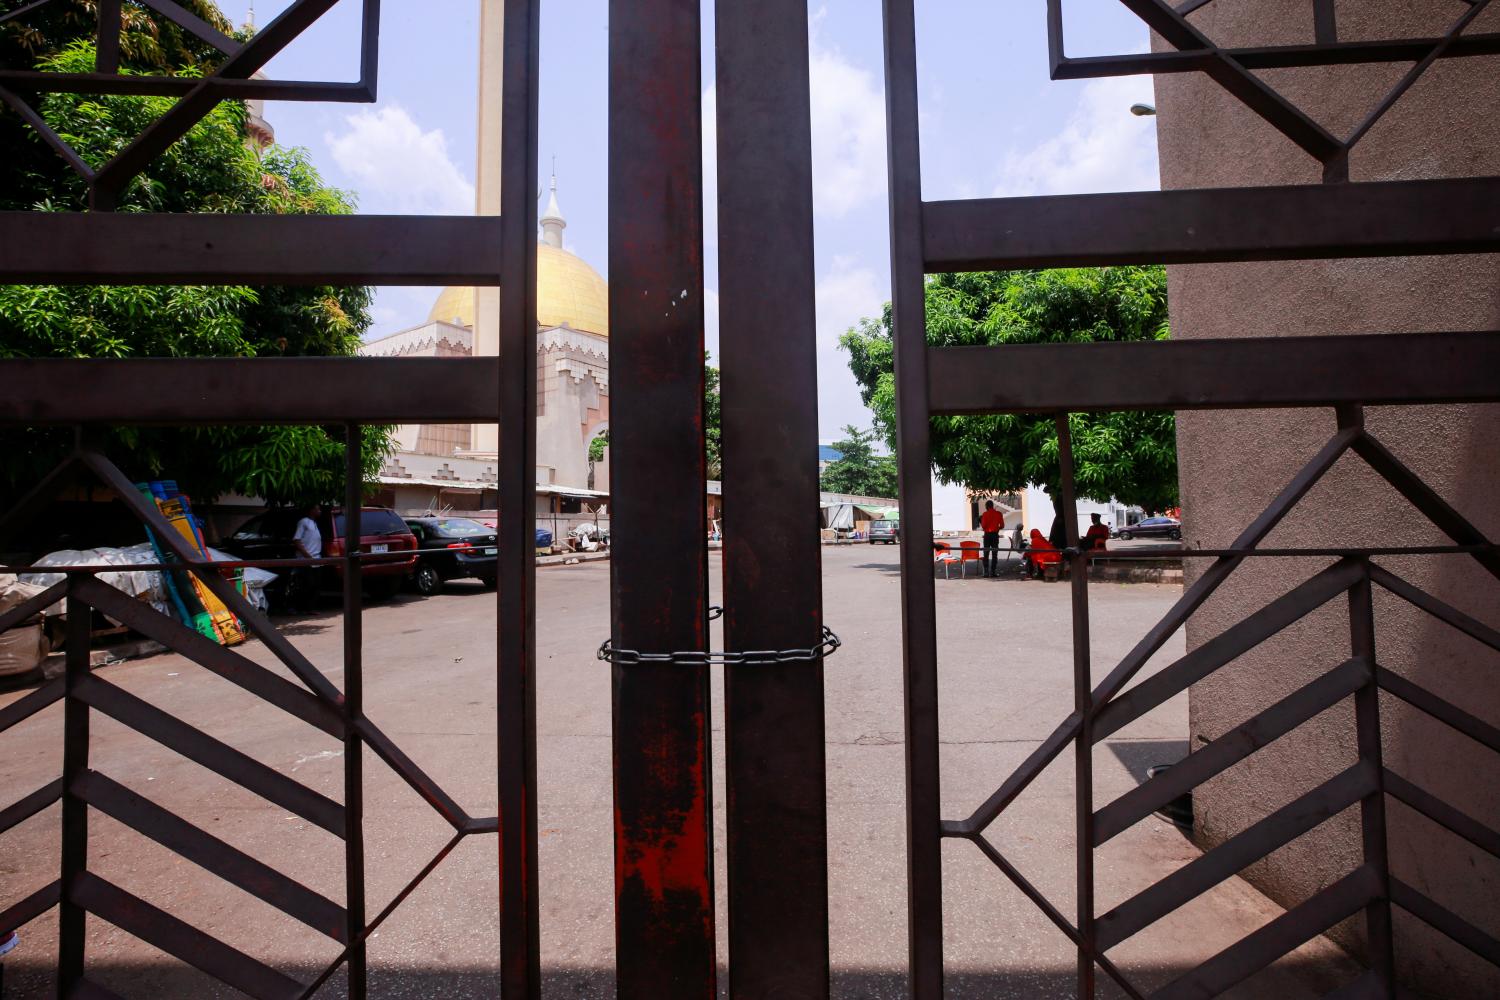 A chain is used to secure the gate of the Abuja National Mosque, as the spread of the coronavirus disease (COVID-19) continues in Abuja, Nigeria March 27, 2020. REUTERS/Afolabi Sotunde